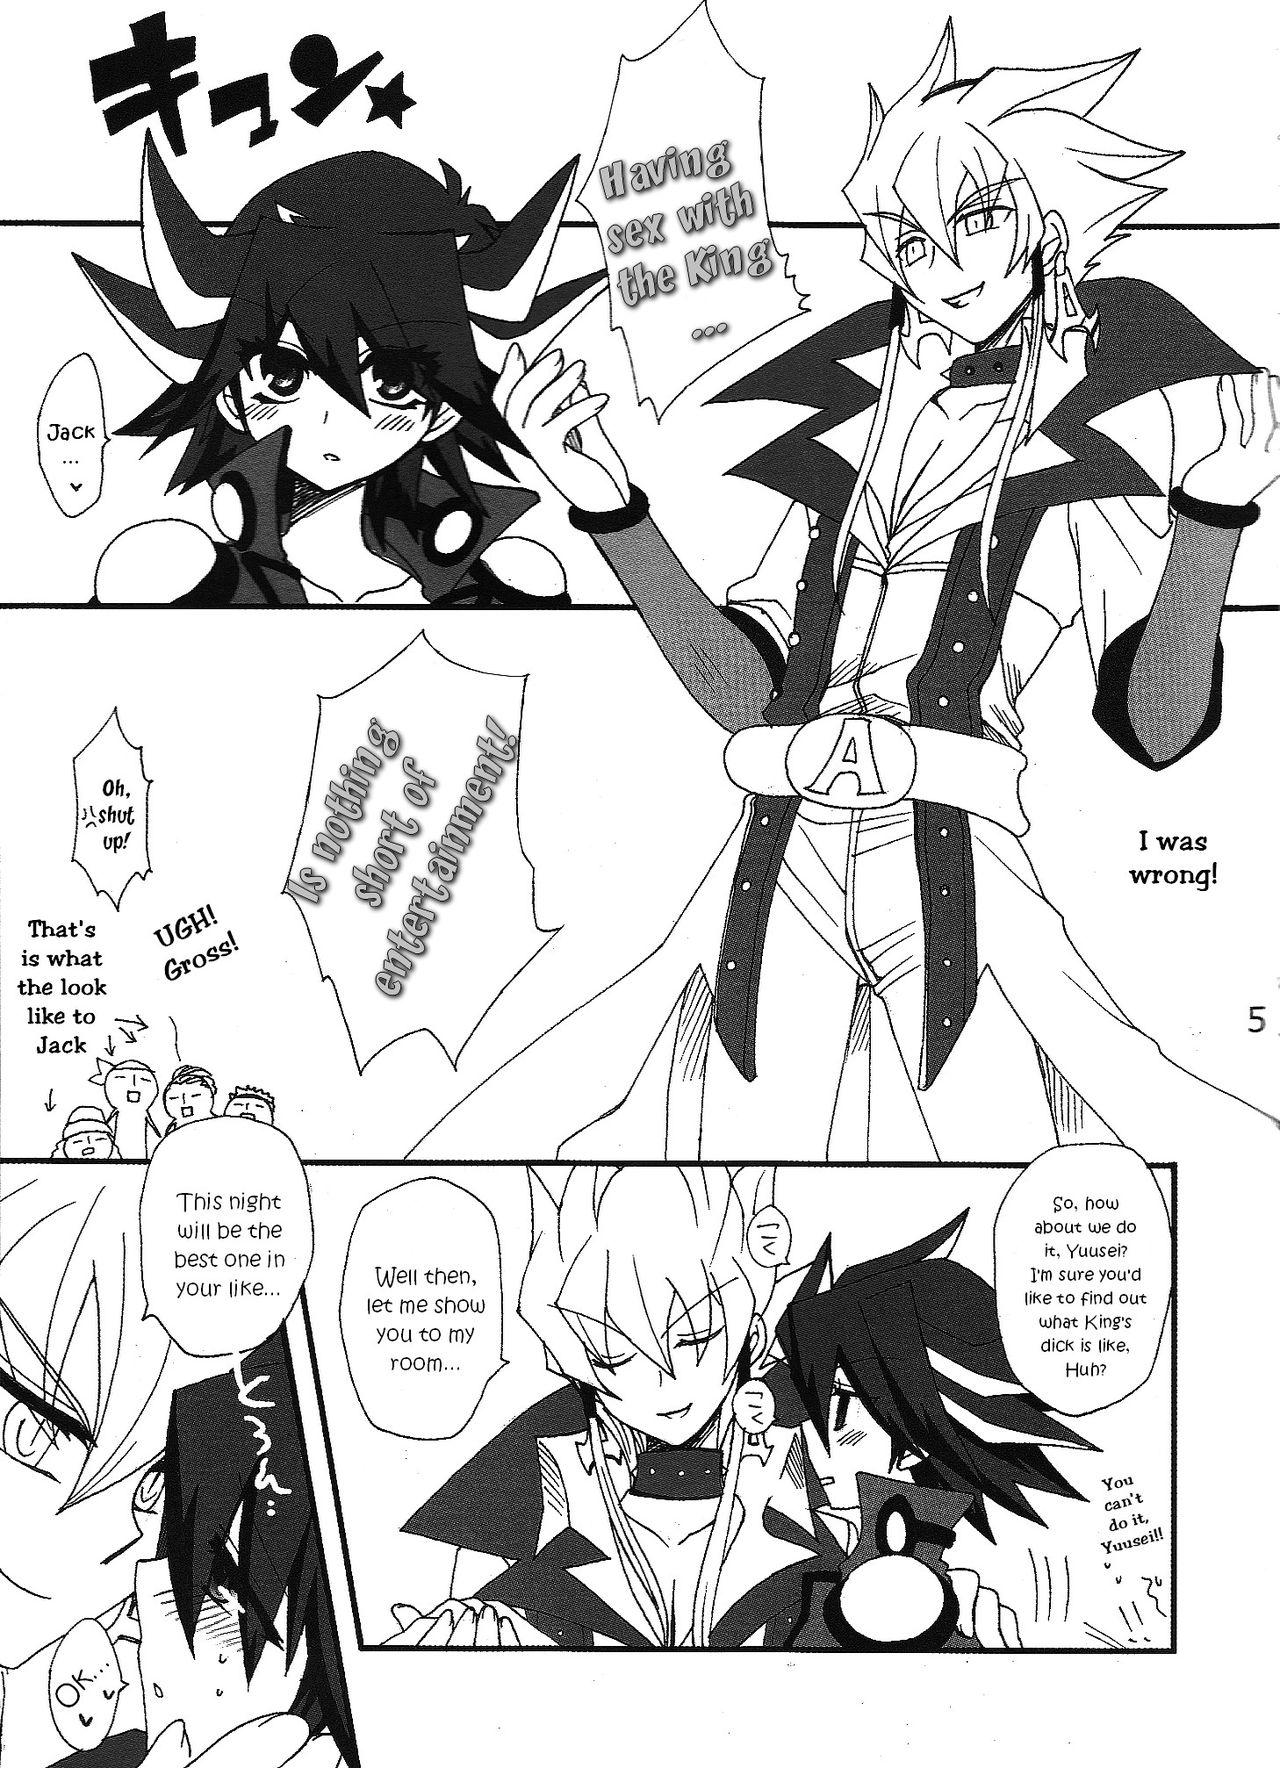 Point Of View Angura - Yu-gi-oh 5ds Crazy - Page 6